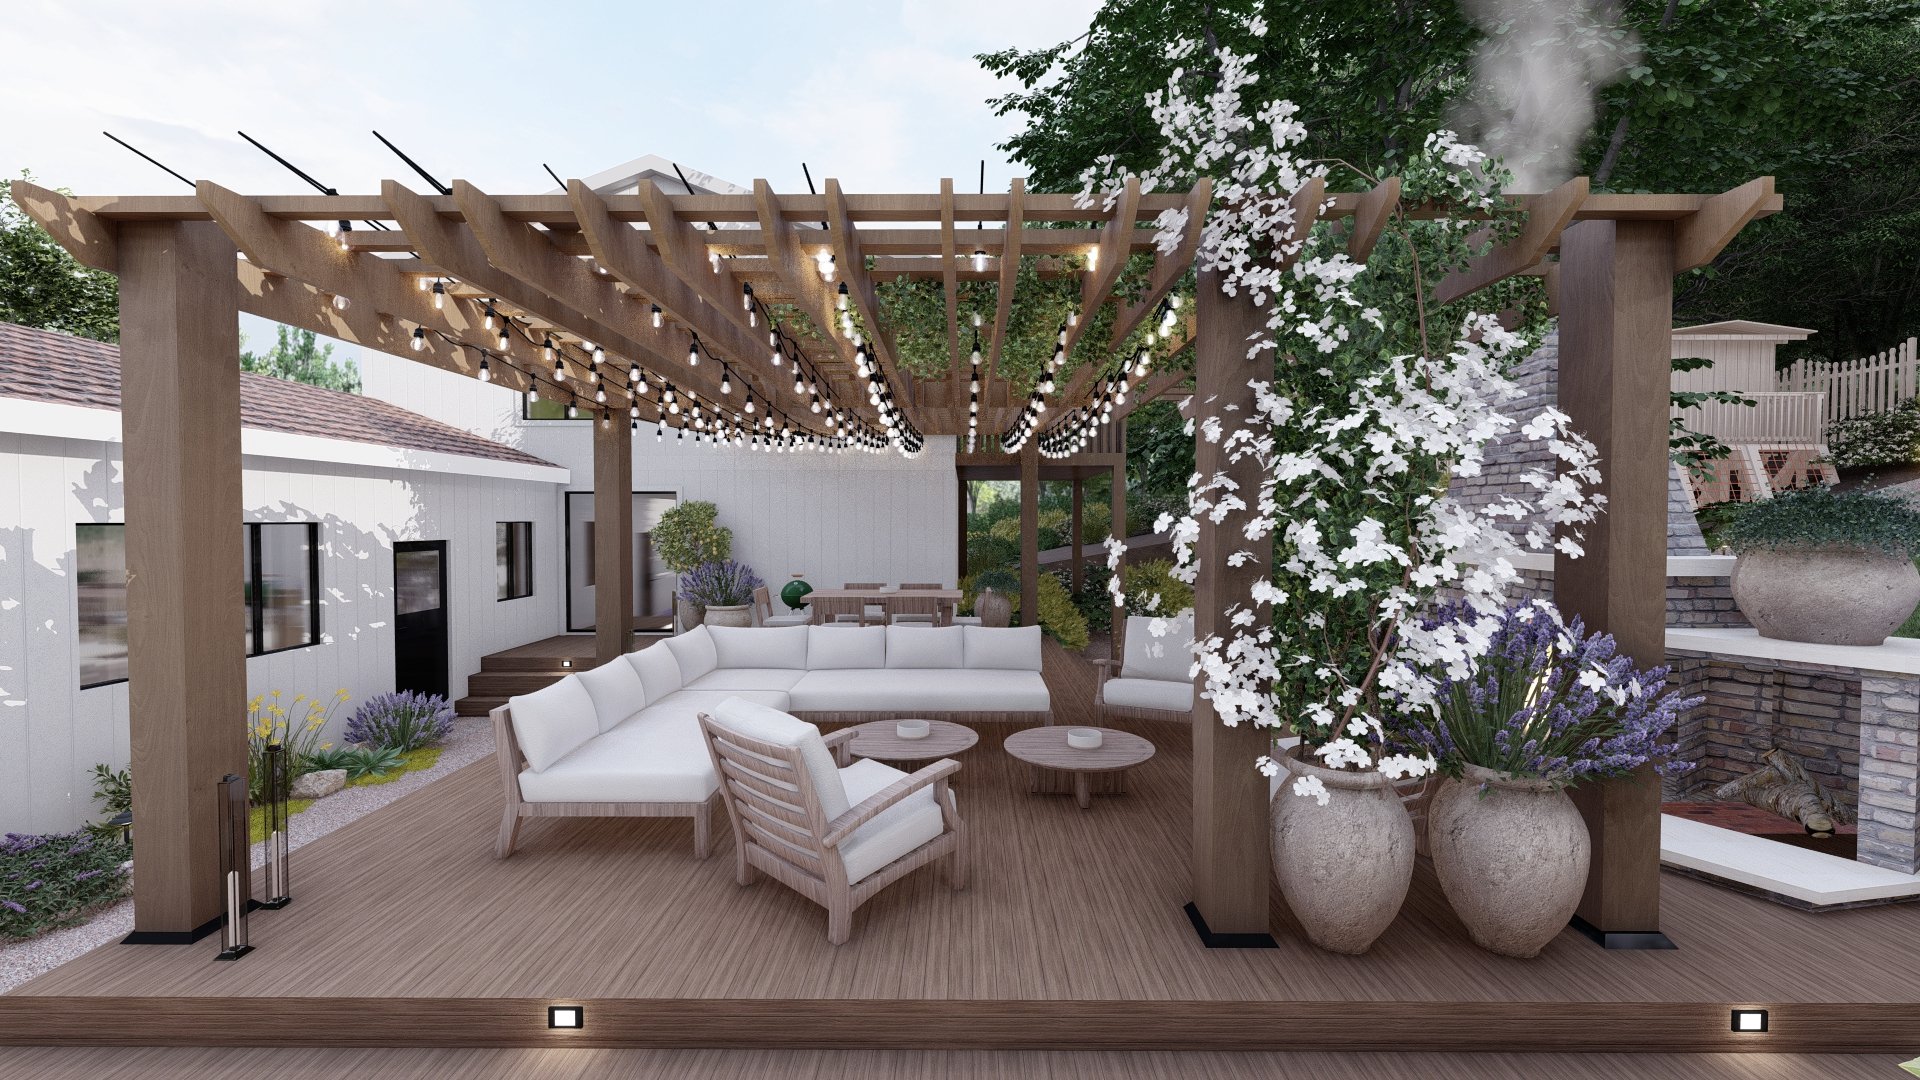 Pergola with lighting, wooden deck , outdoor furniture and ornamental plants